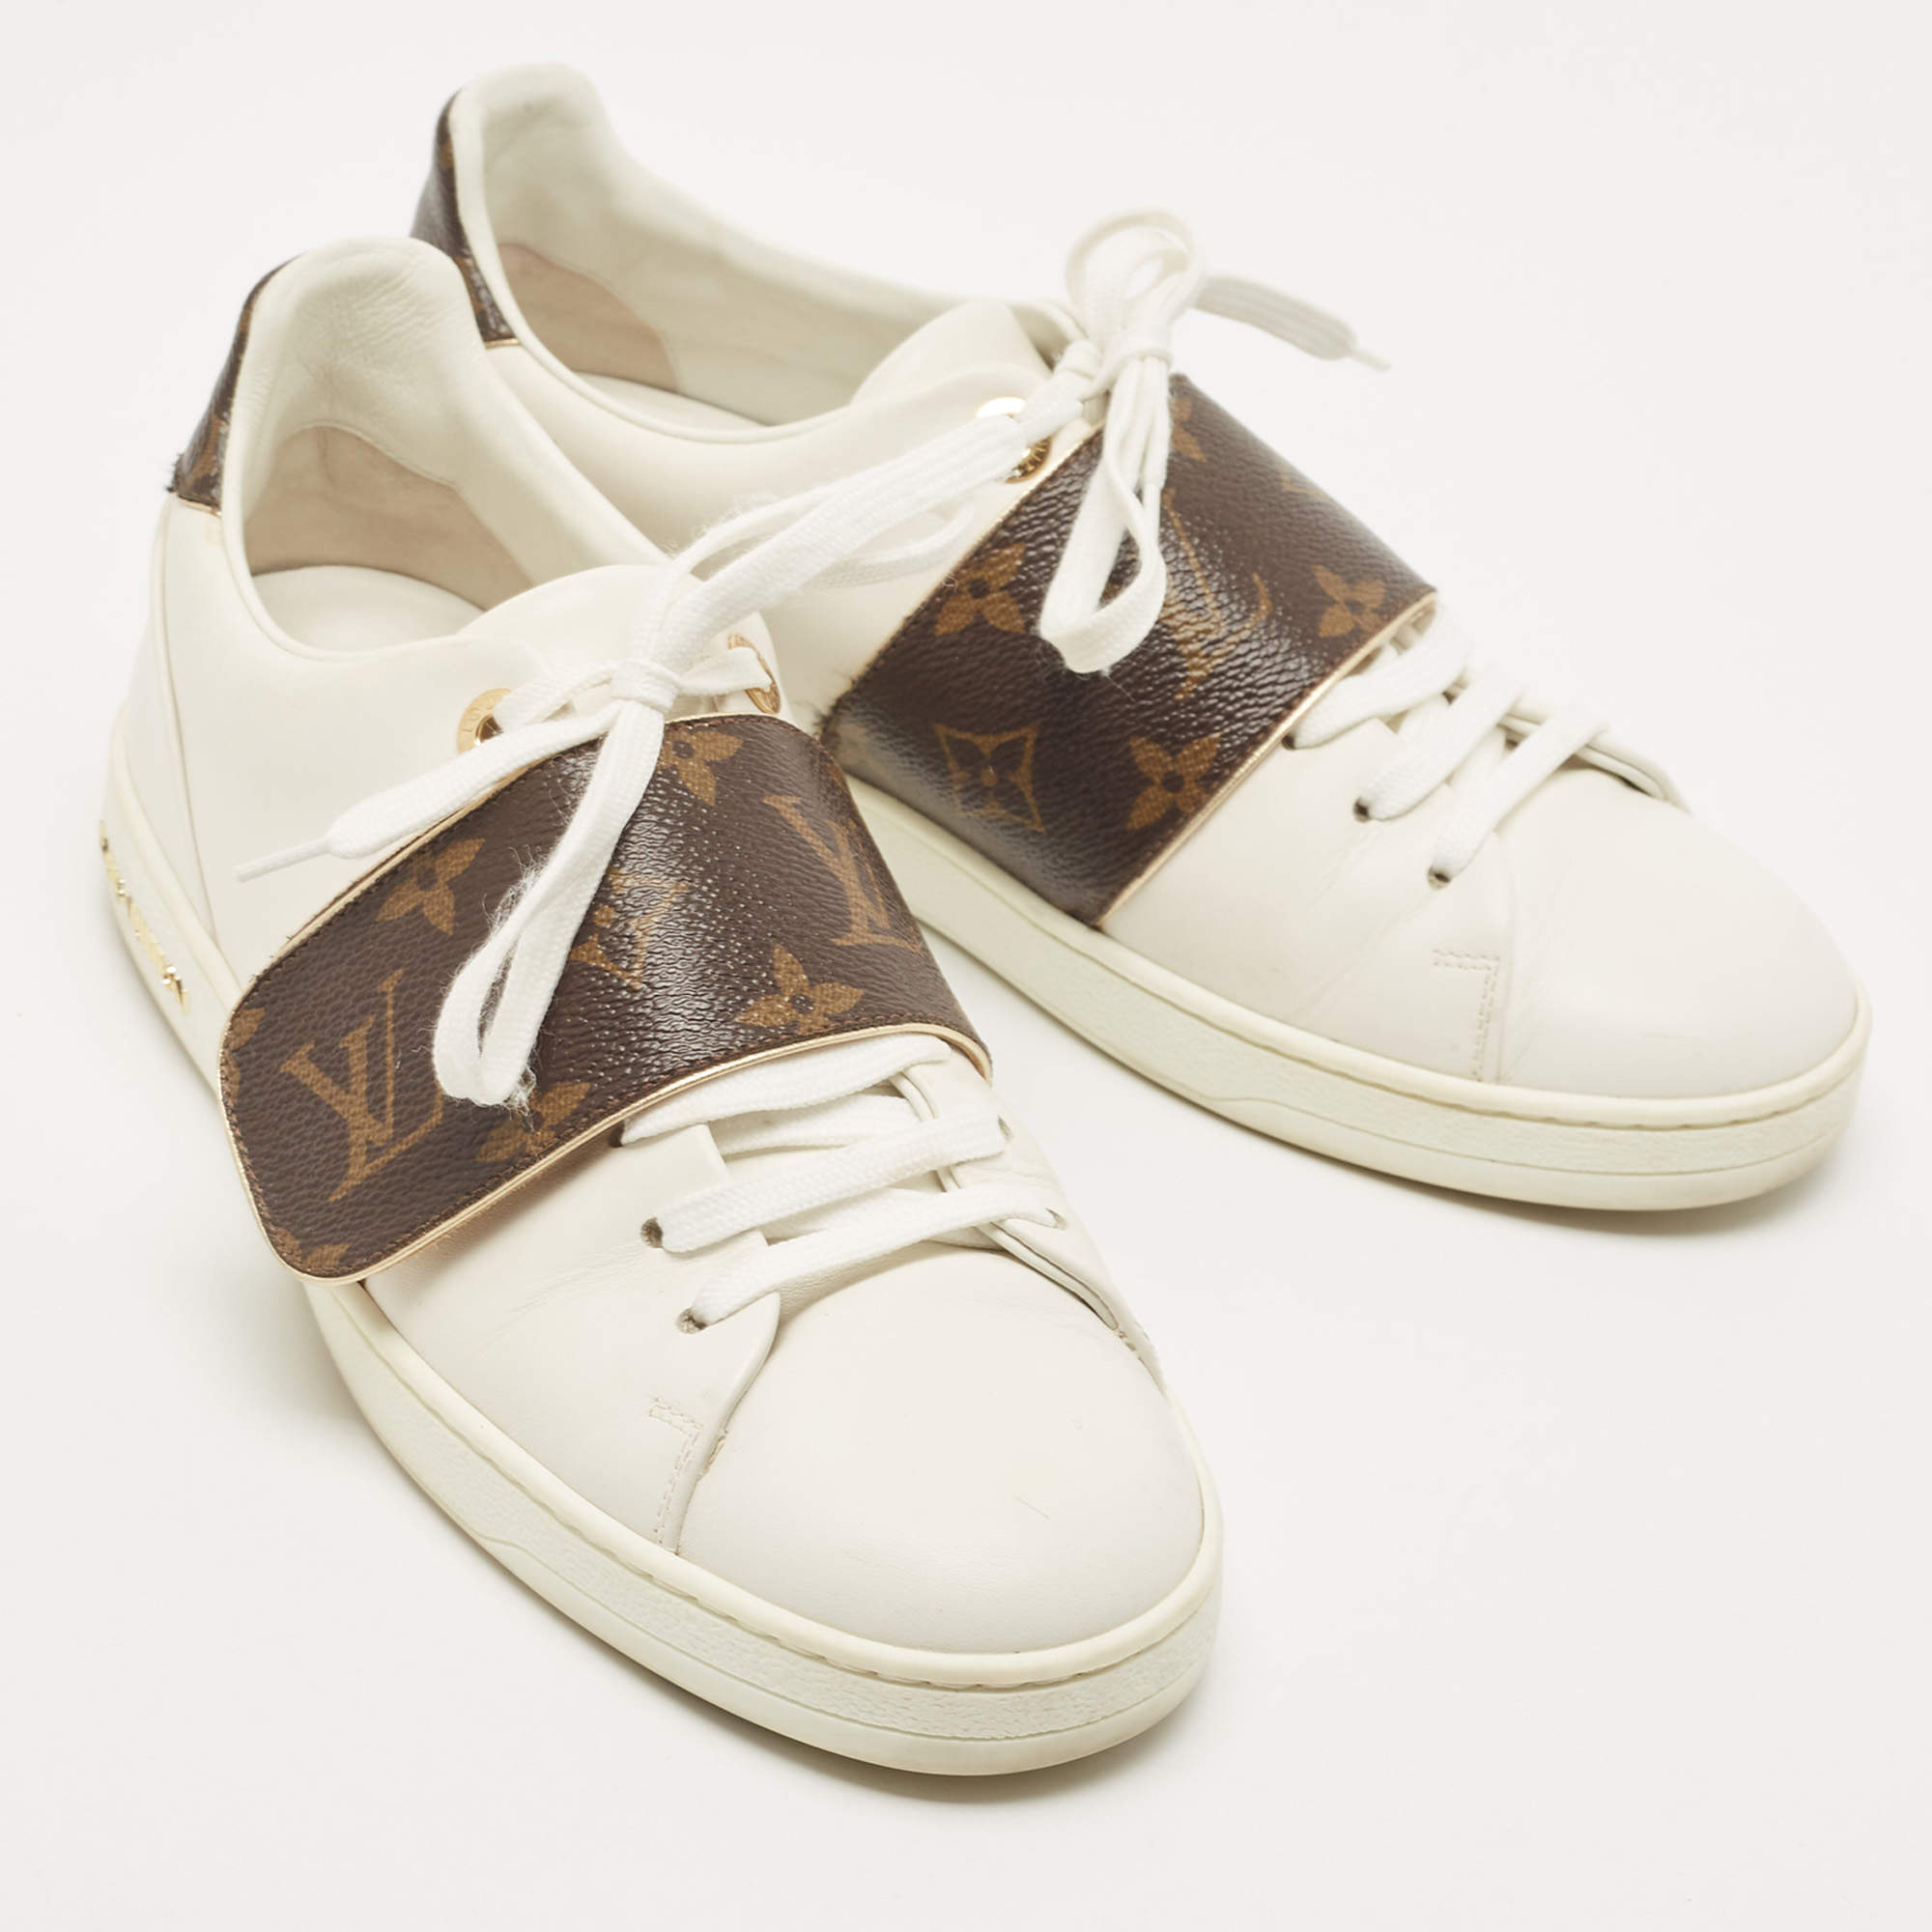 65753 auth LOUIS VUITTON white & gold leather FRONT ROW Sneakers Shoes 36